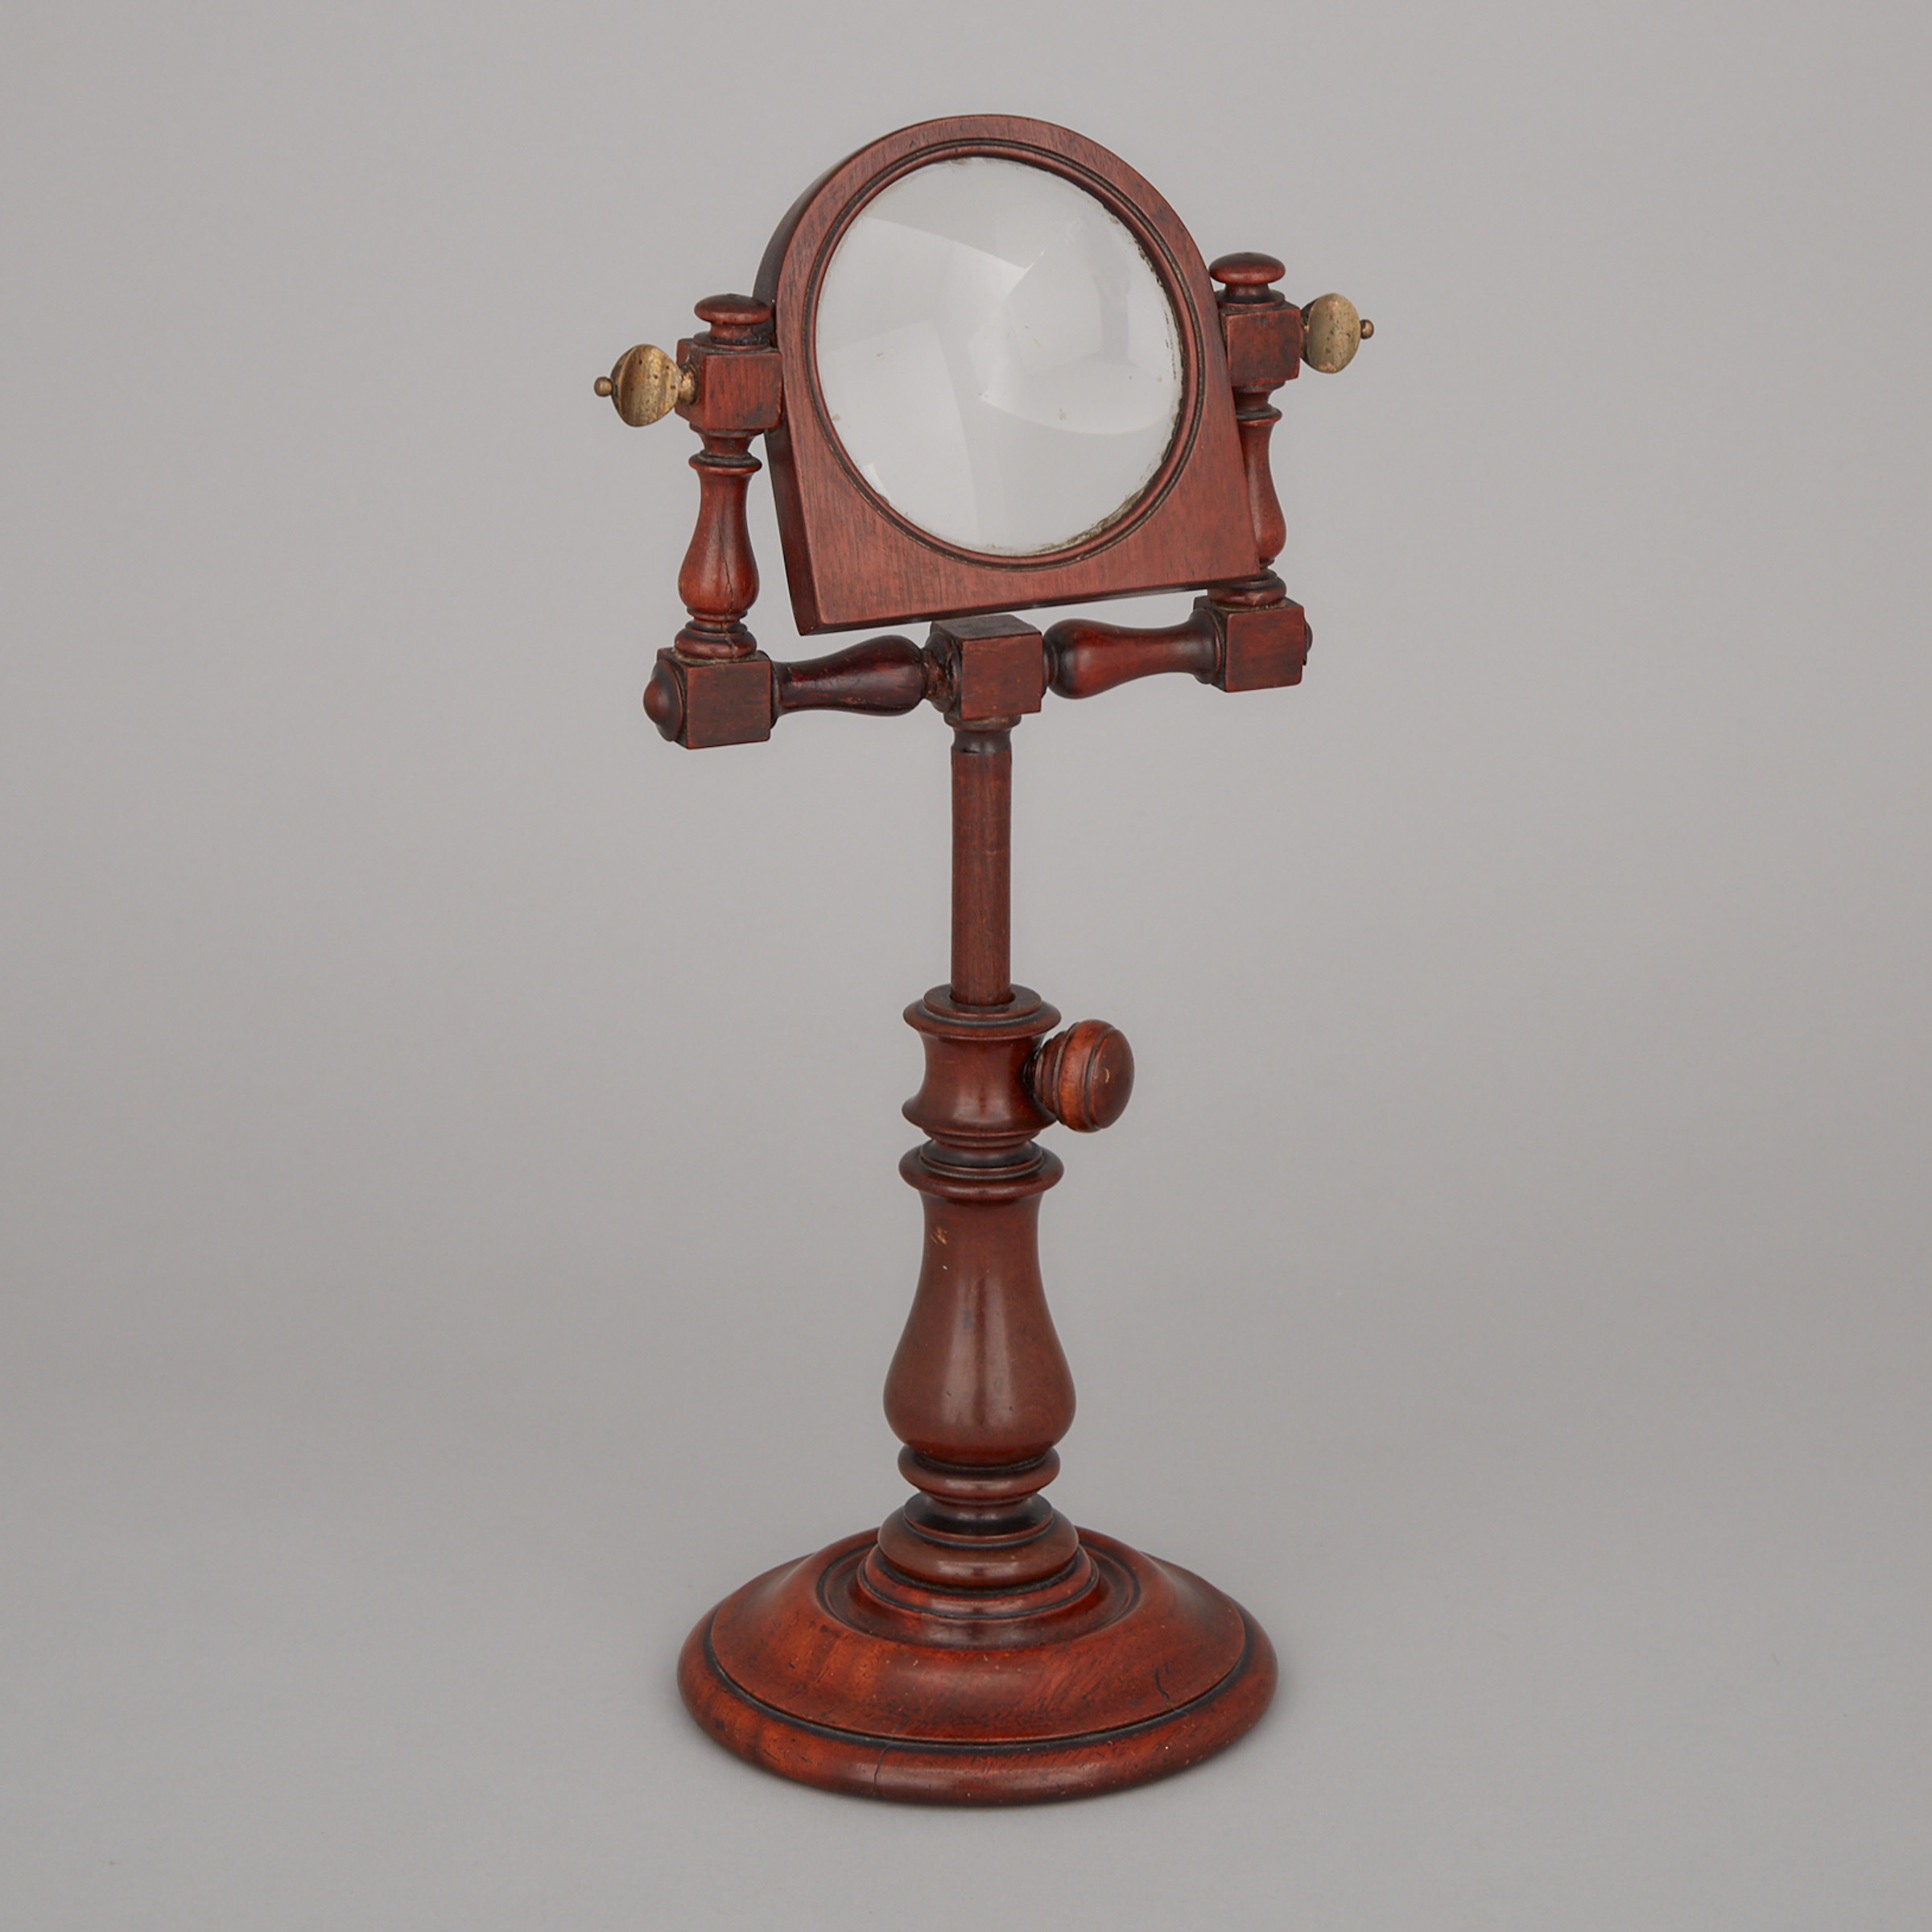 Early VIctorian Turned Mahogany Library Magnifying Glass on Stand, early 19th century